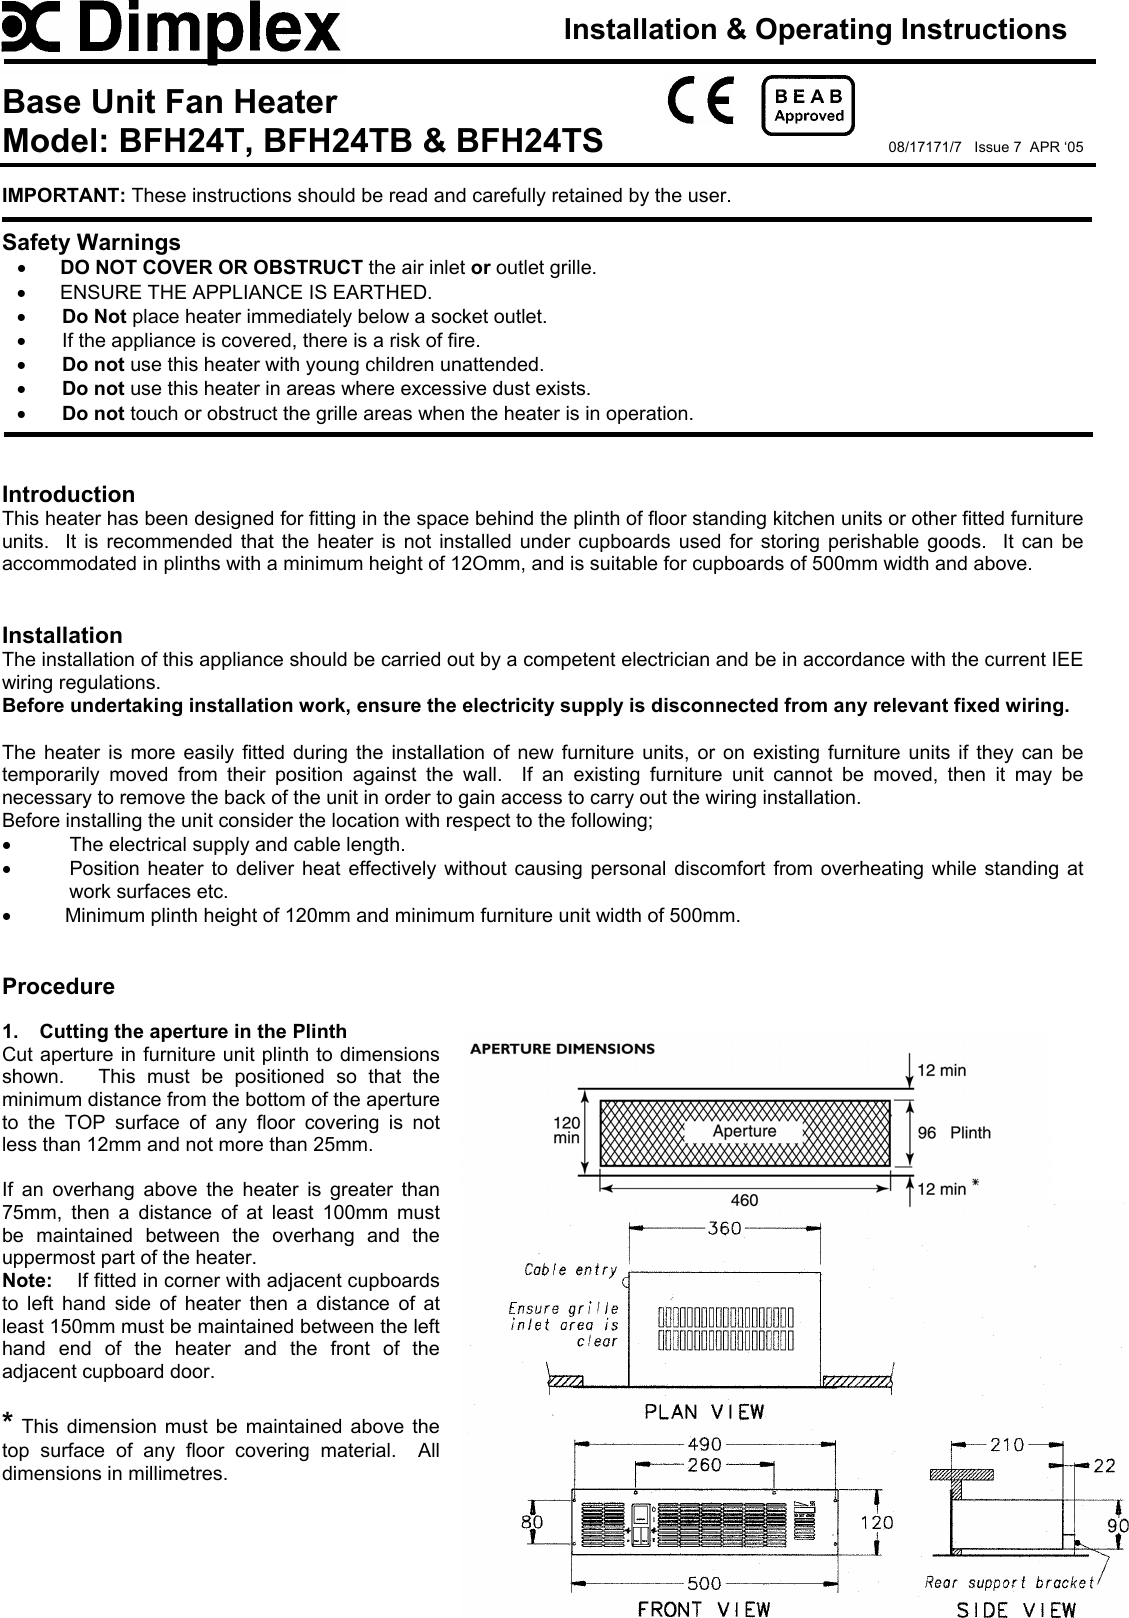 Page 1 of 4 - Dimplex Dimplex-Bfh24T-Users-Manual BFH24T Base Unit Heater - Issue 7